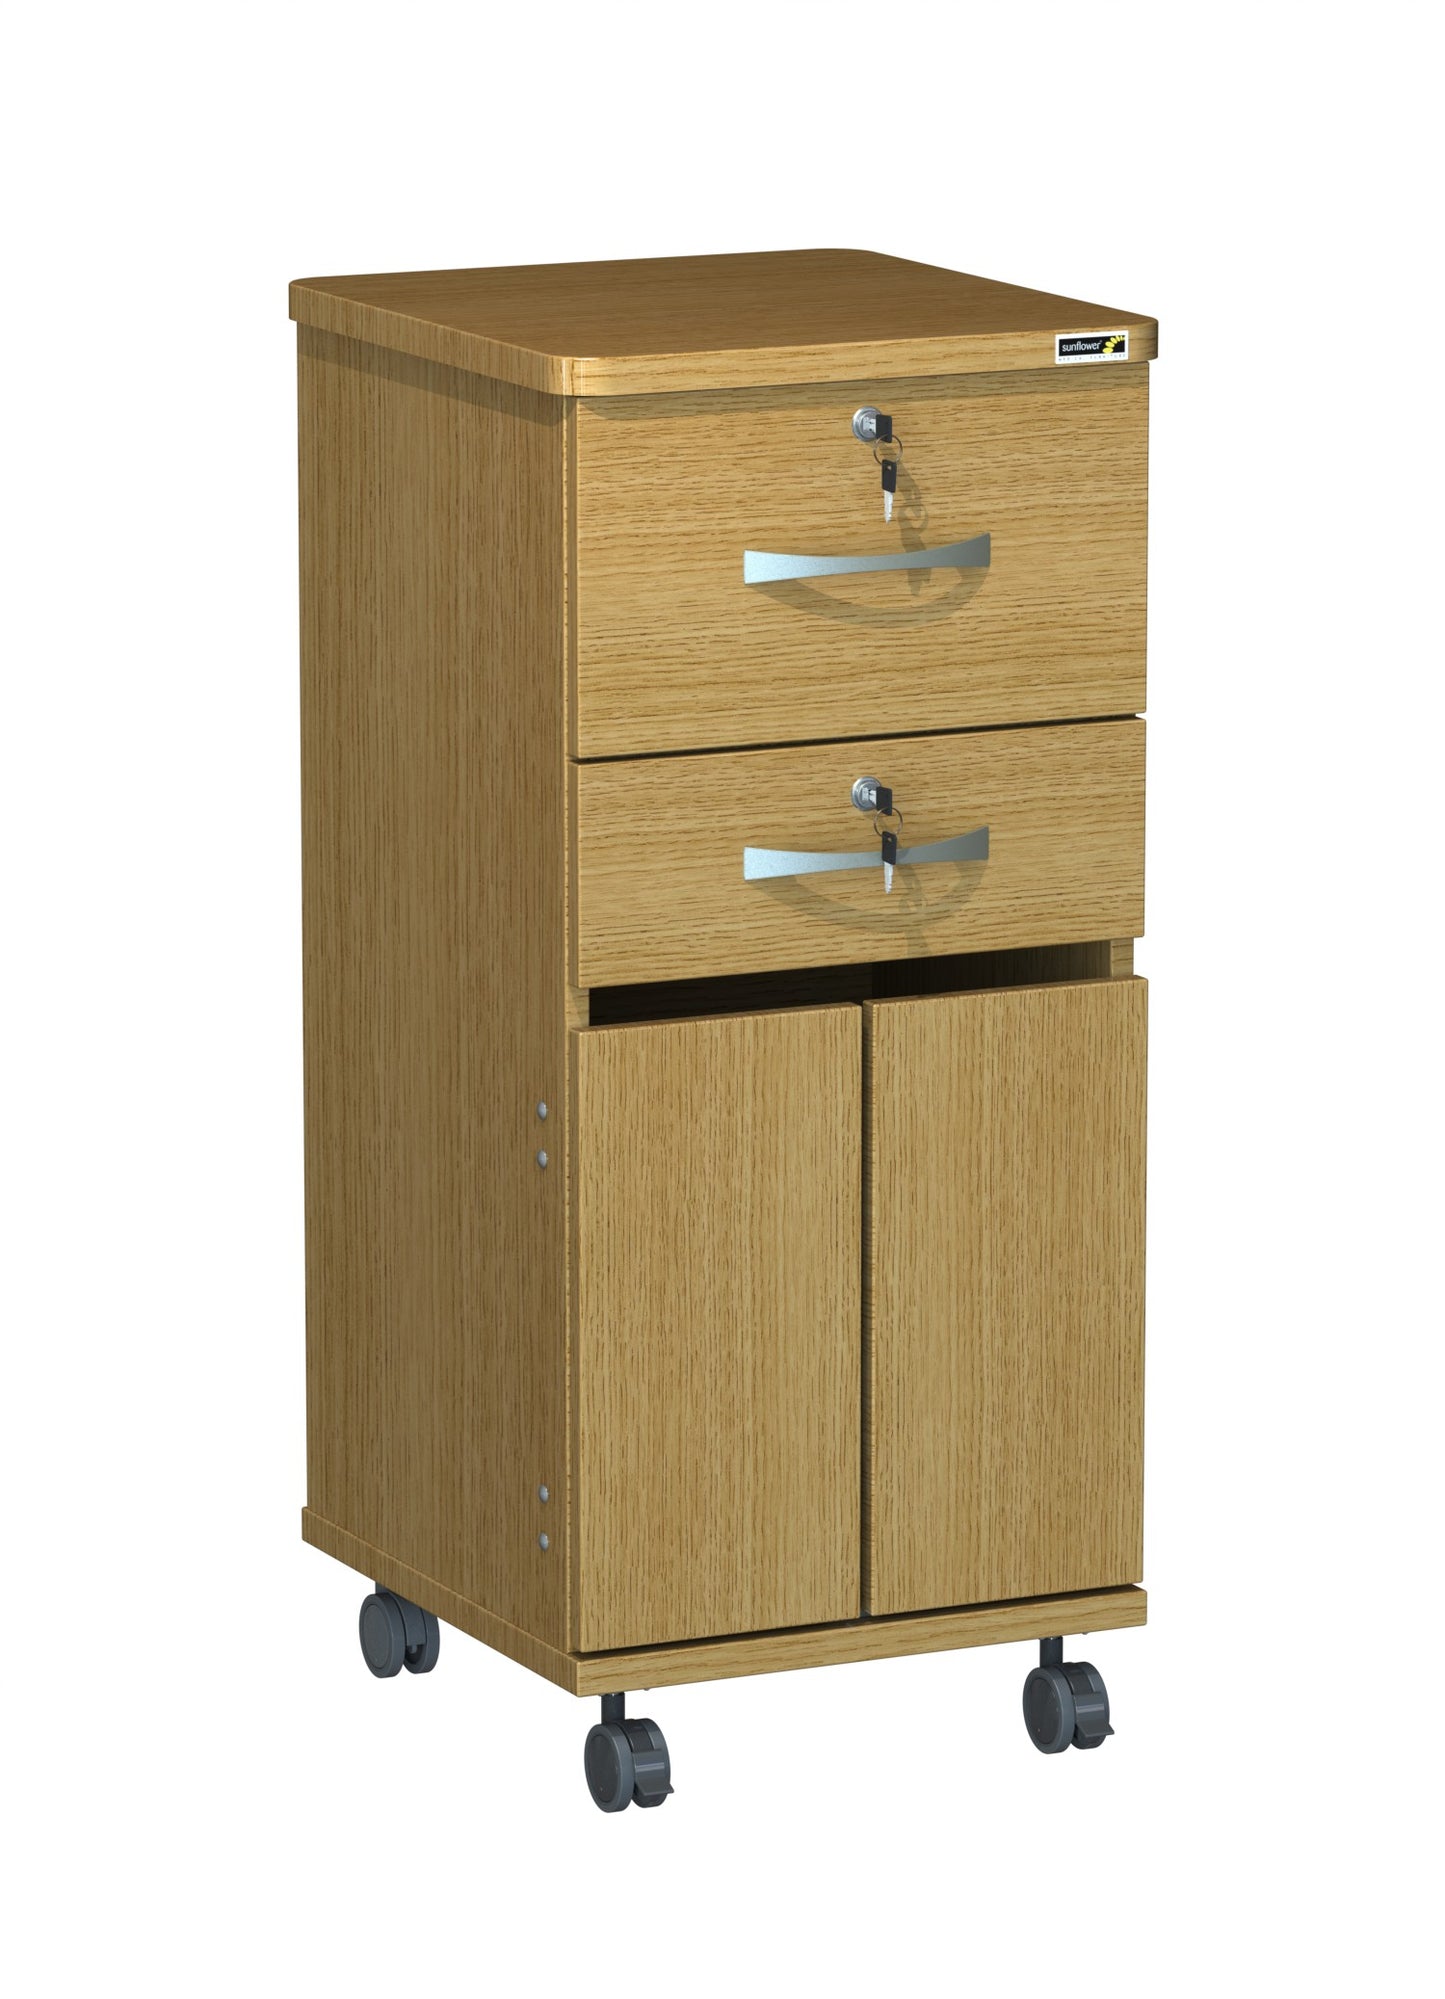 Axis Bedside Locker - Locking Top and Middle Draw - Bottom Doors